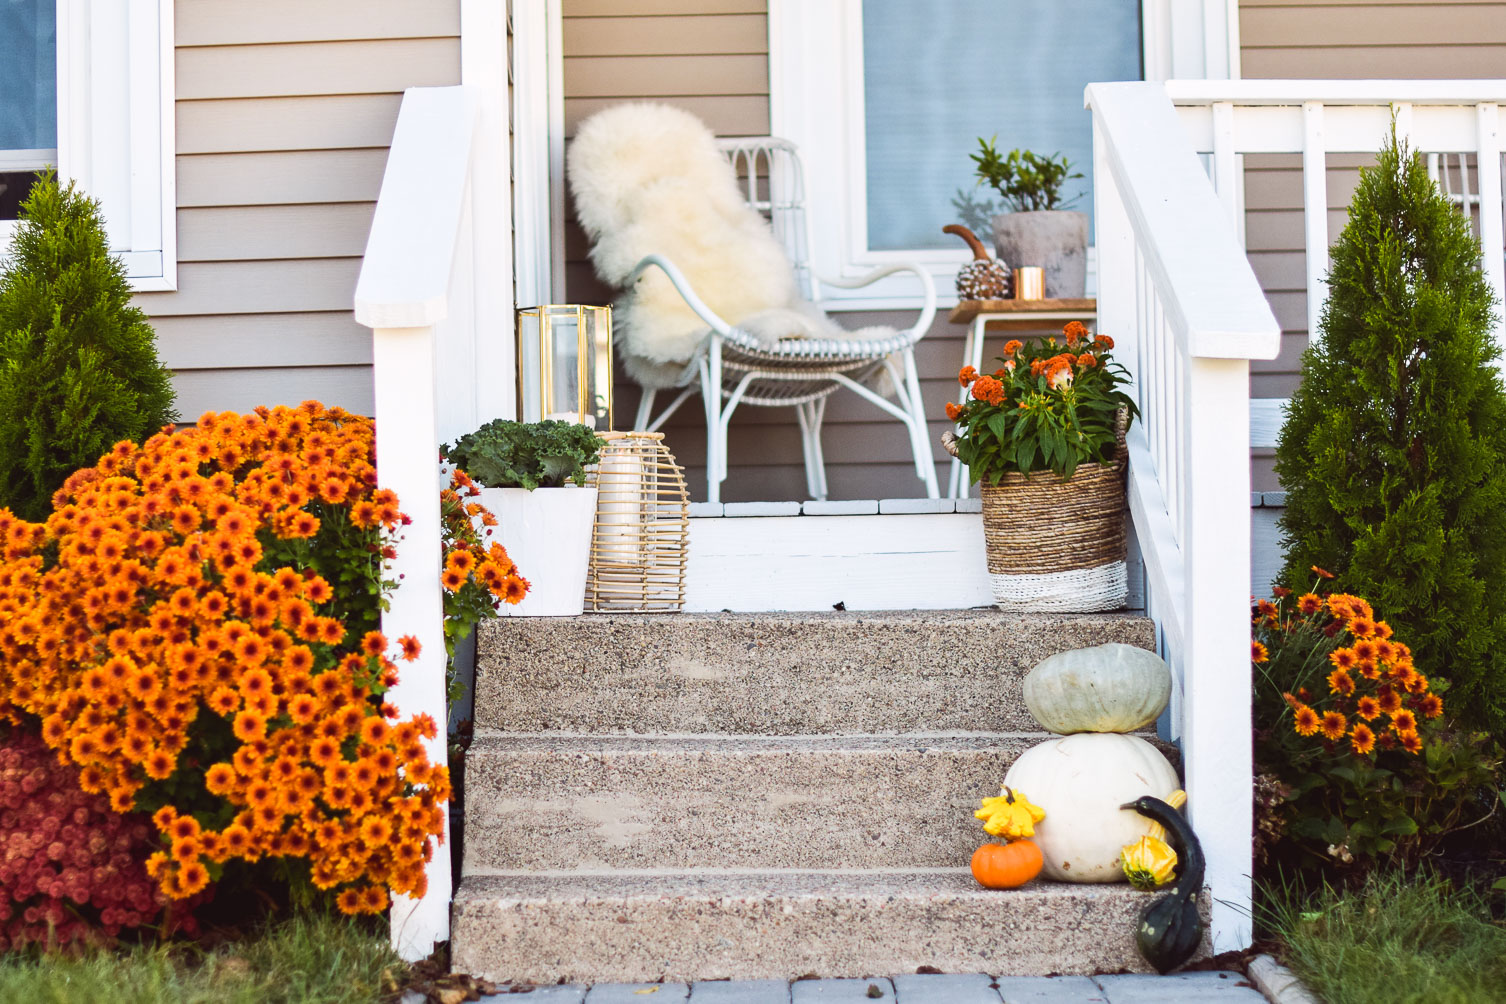 styling a porch with cute and festive outdoor fall decor on a budget